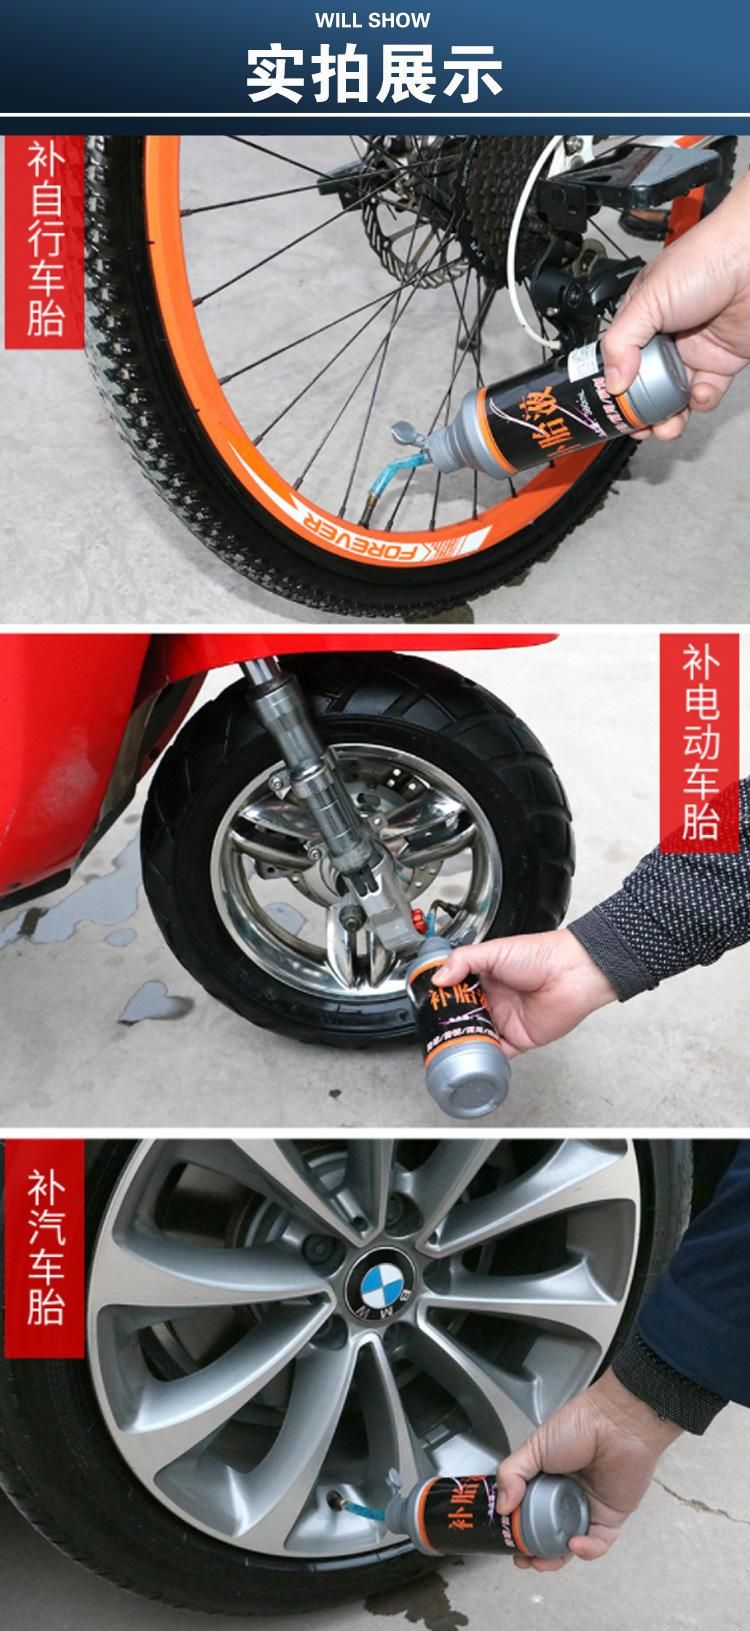 Free Sample Automatic Automobile Tire Repair Liquid Bicycle/Tricycle/Motorcycle Tire Repair Fluid